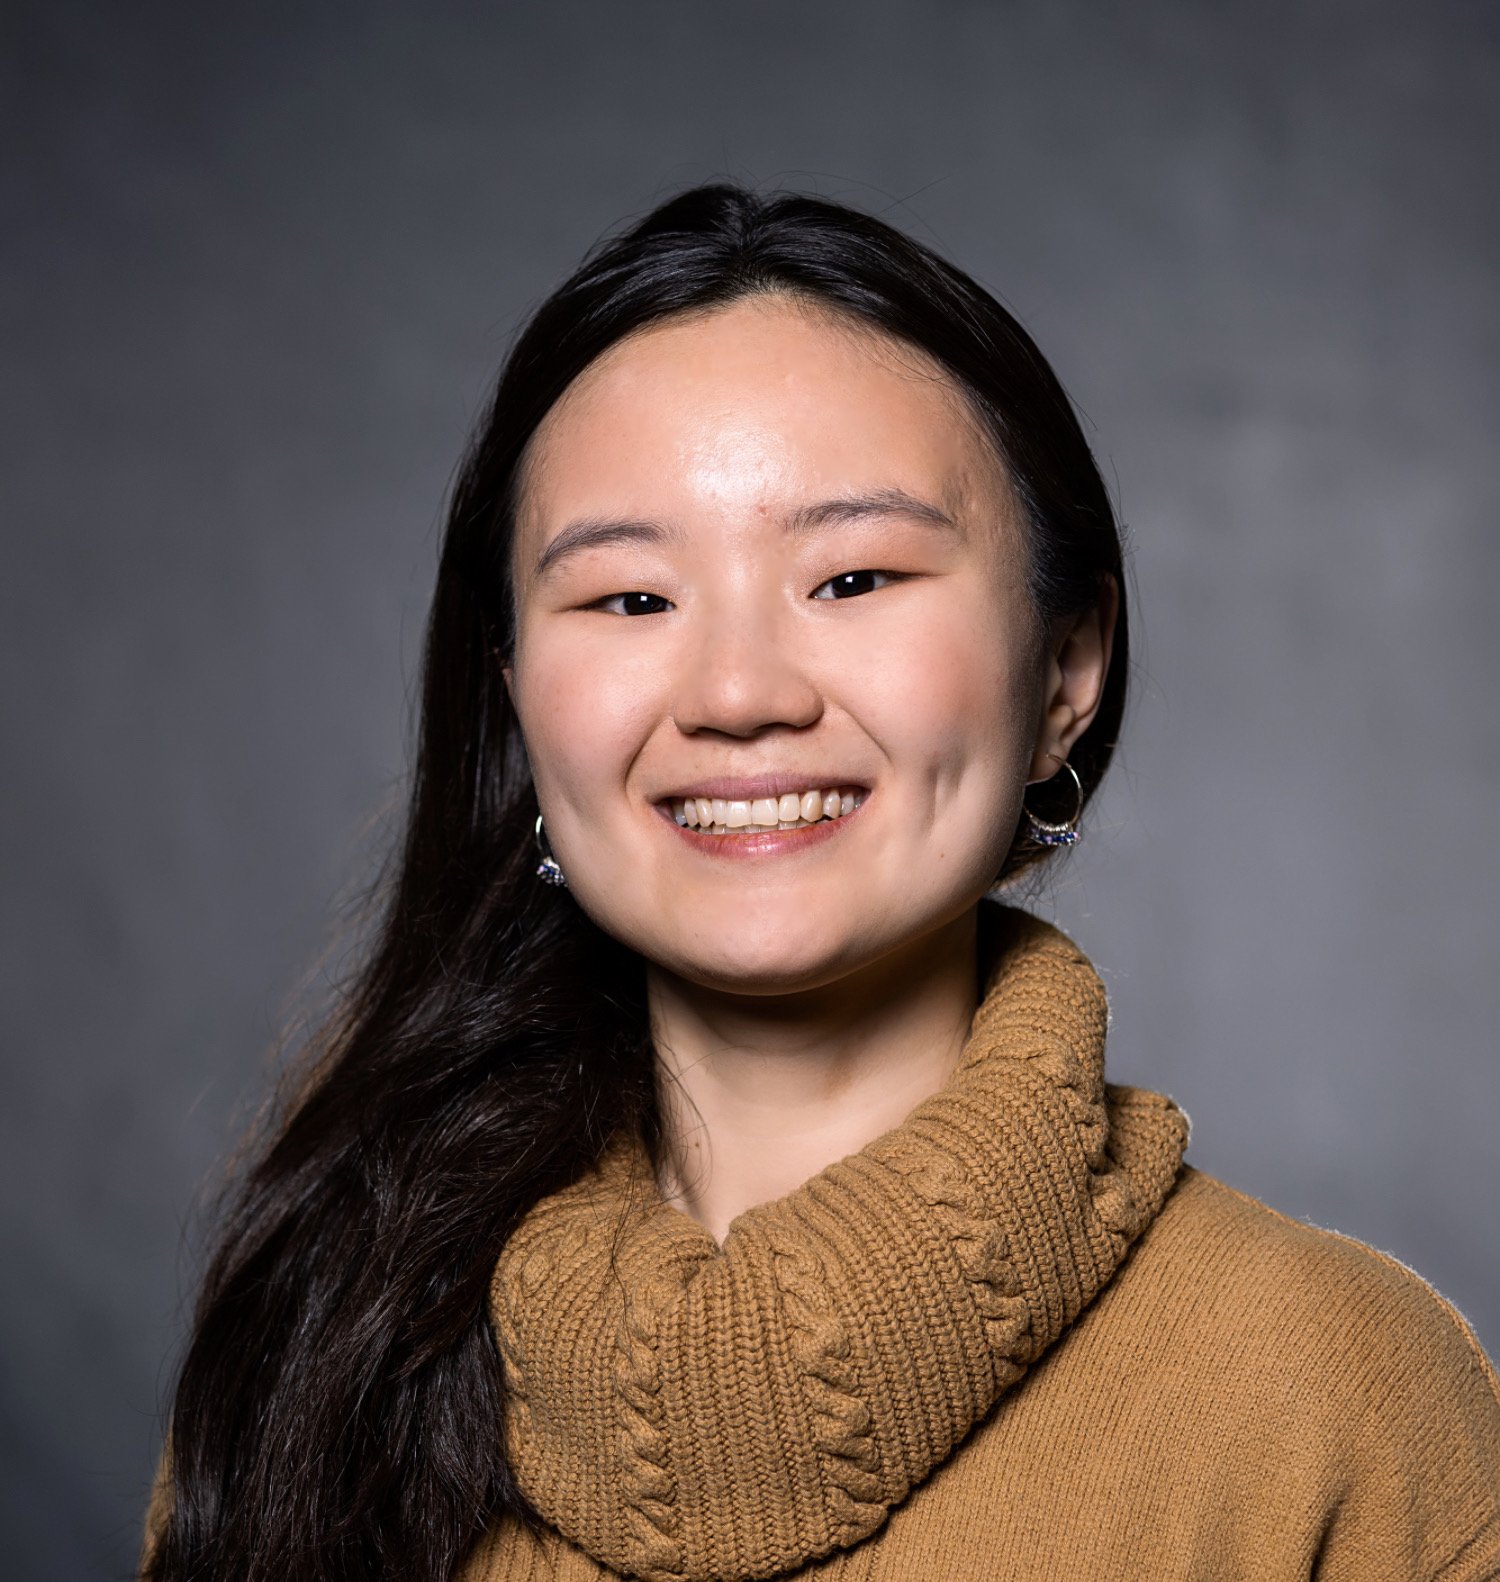 Rui Cheng in a professional headshot smiles with her long black hair pulled in front of her right shoulder, wearing a gold turtleneck knitted sweater